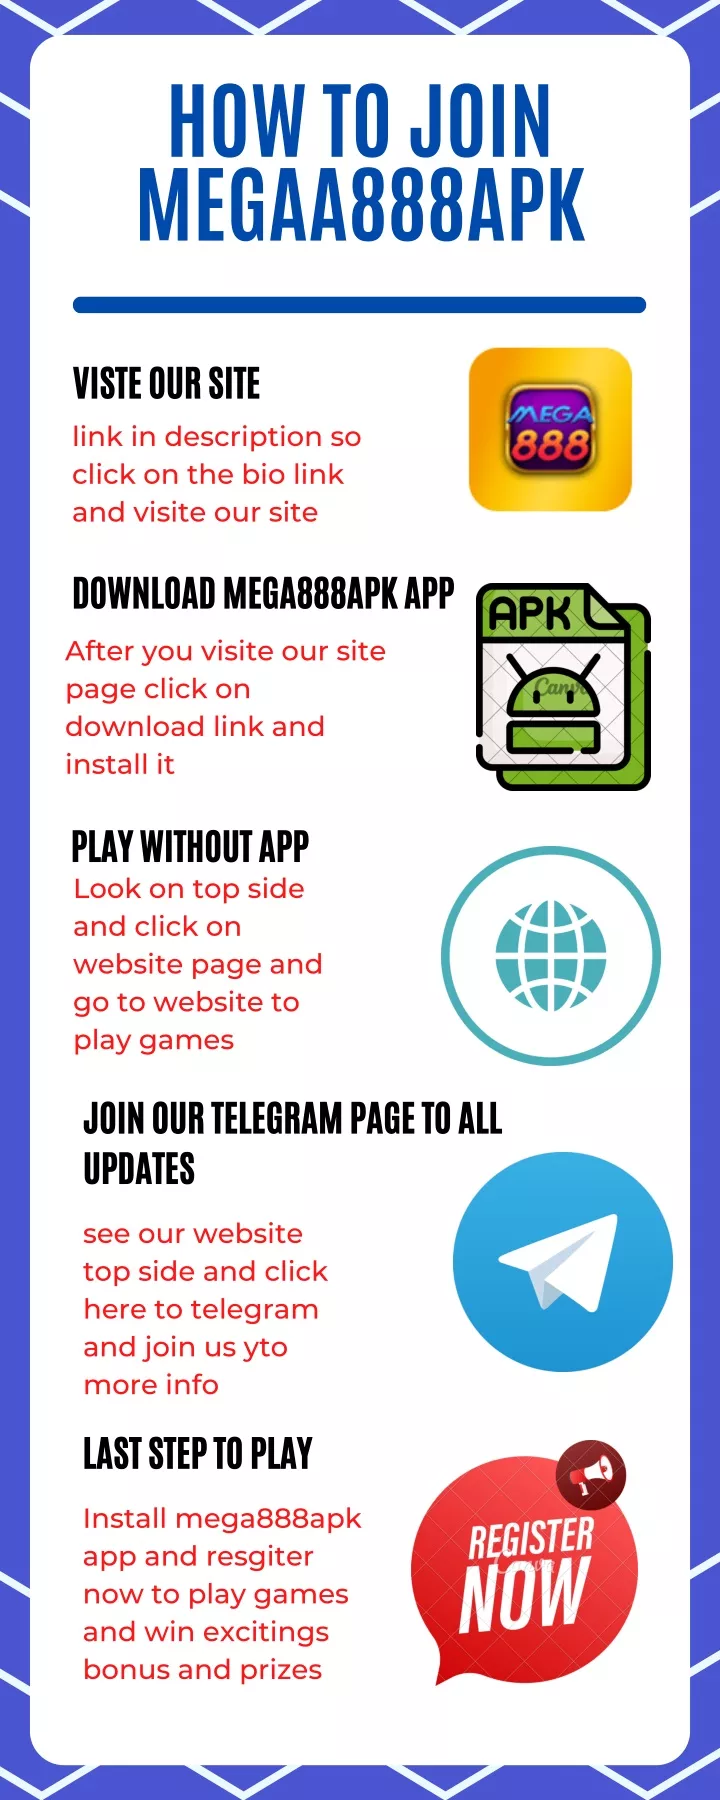 how to join megaa888apk